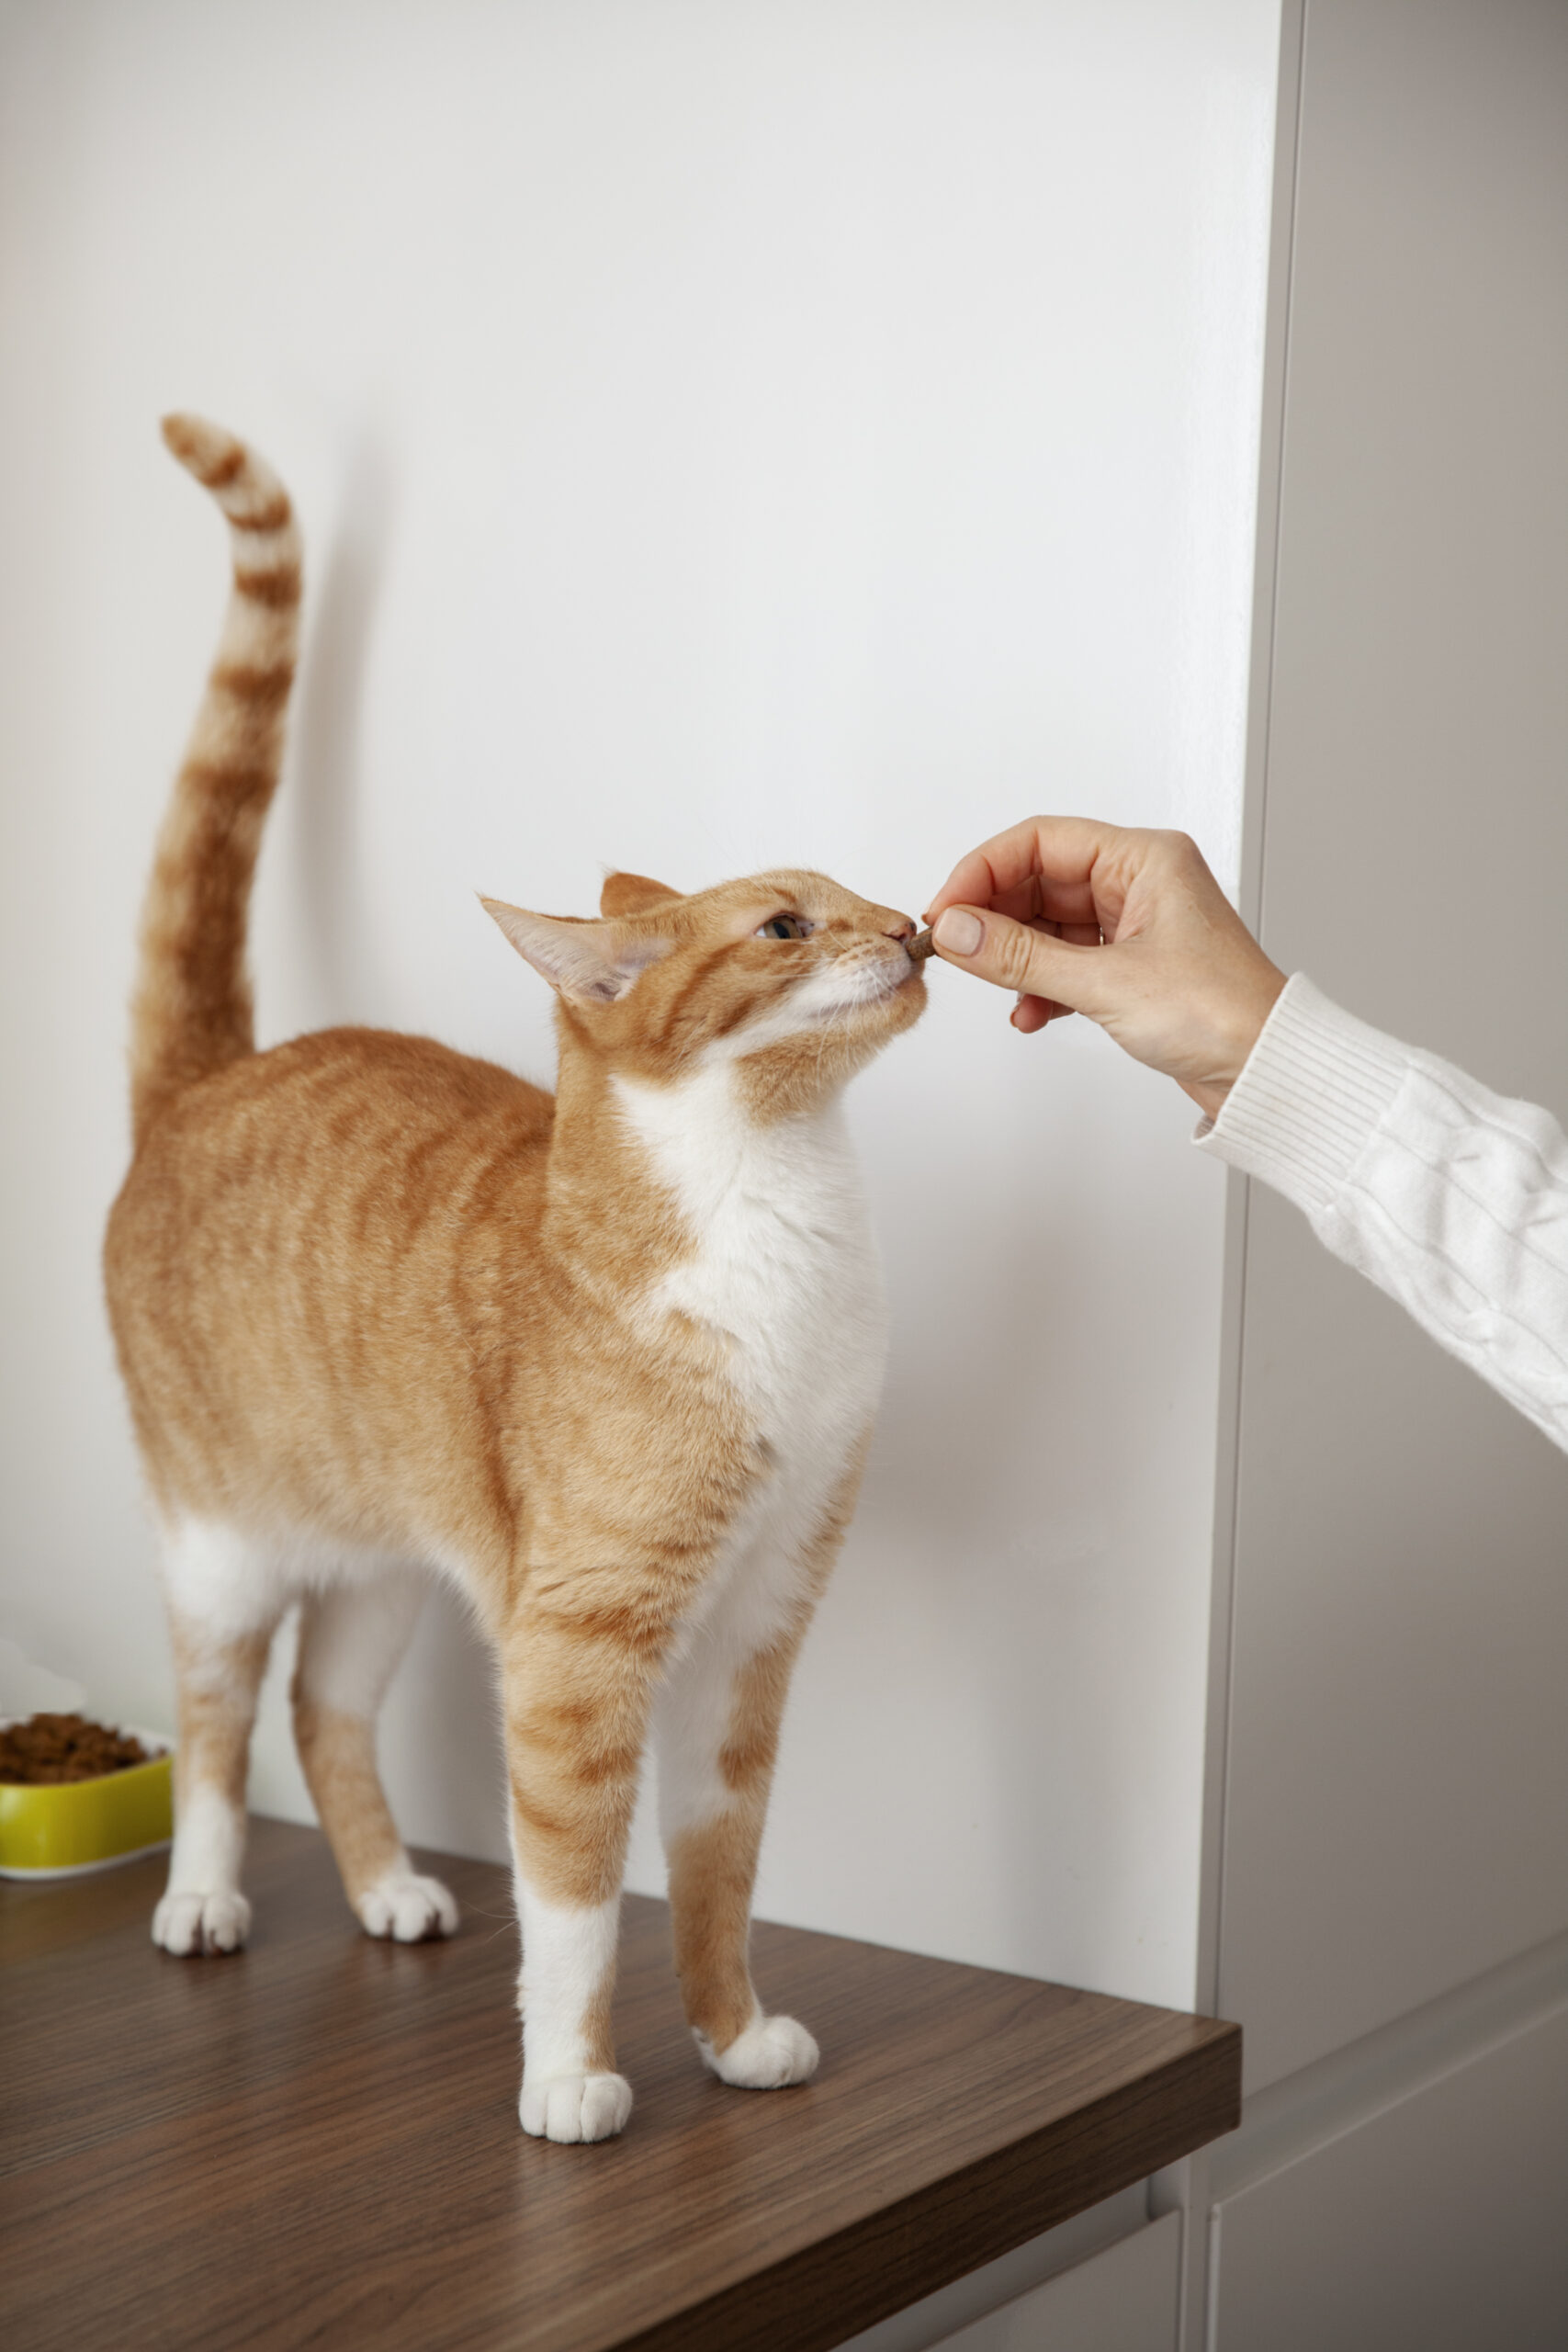 Transitioning Cats to Proper Diet